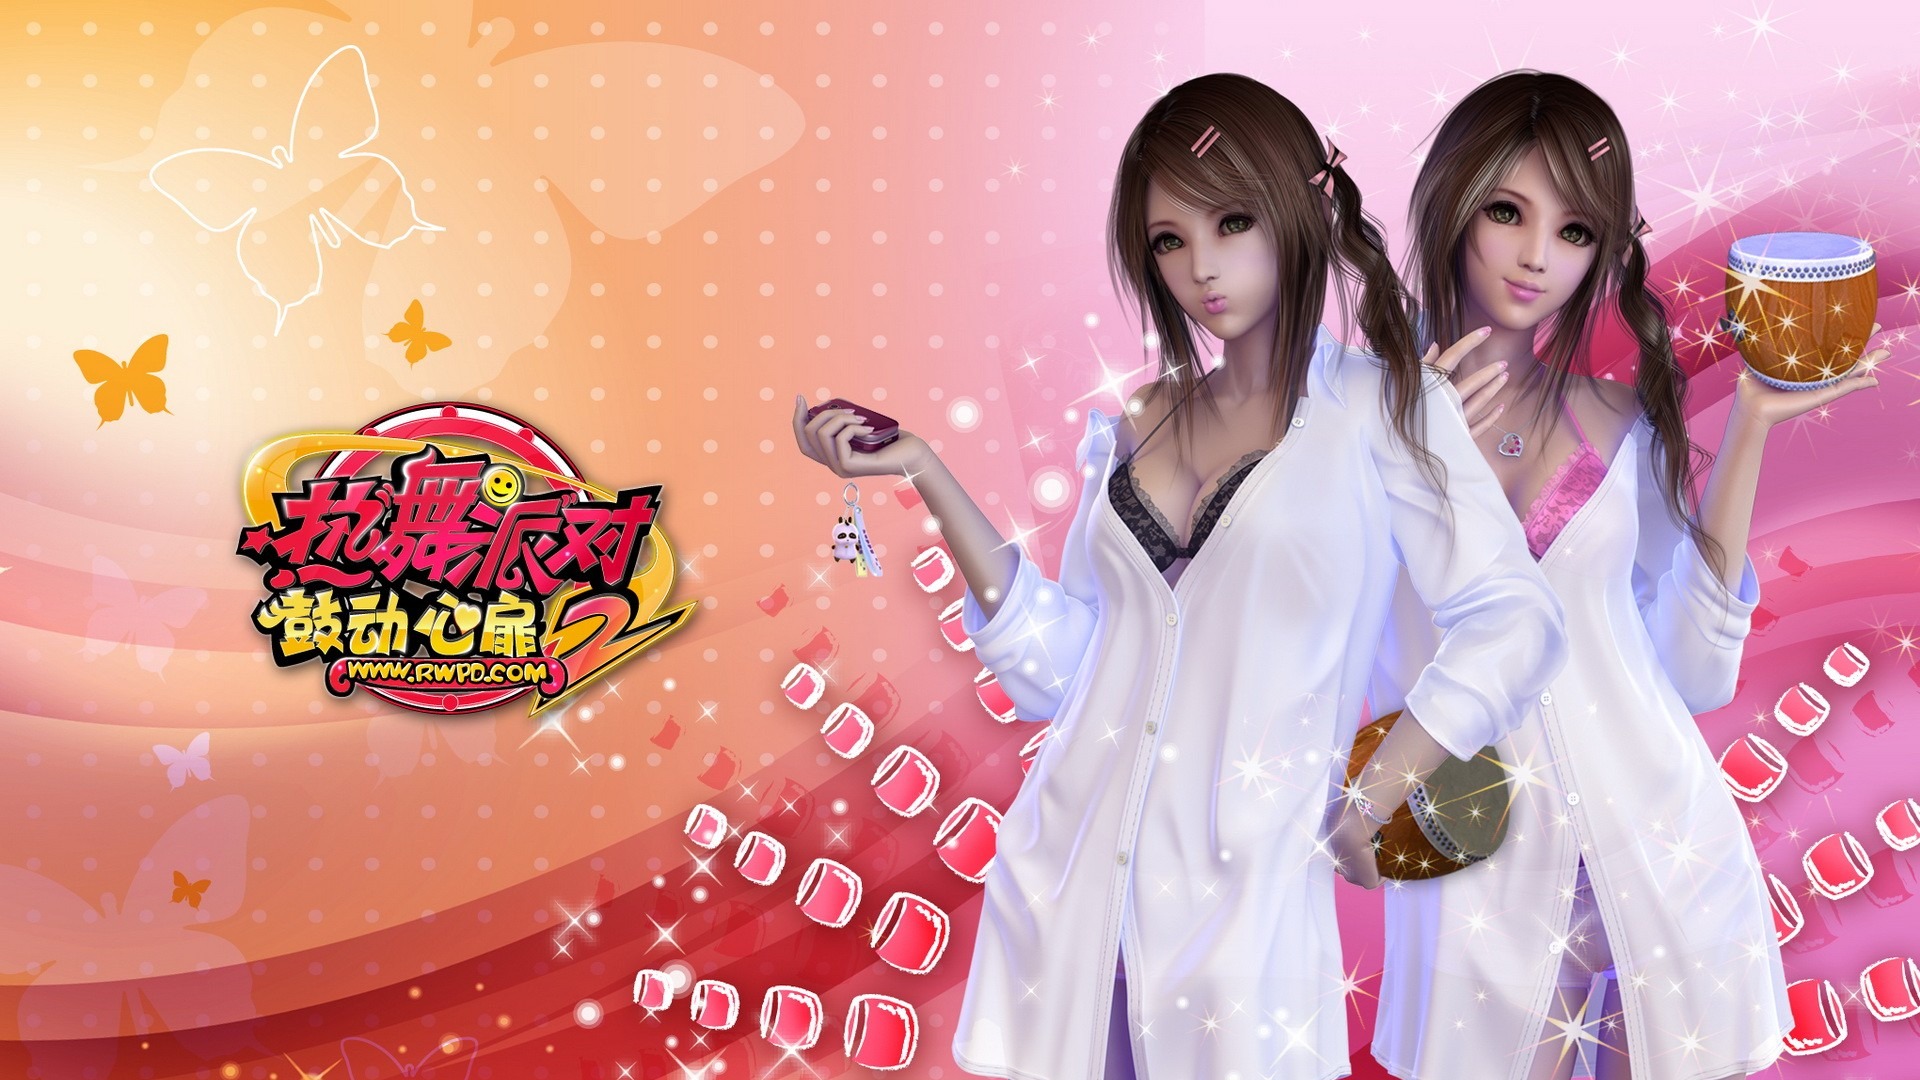 Online game Hot Dance Party II official wallpapers #12 - 1920x1080